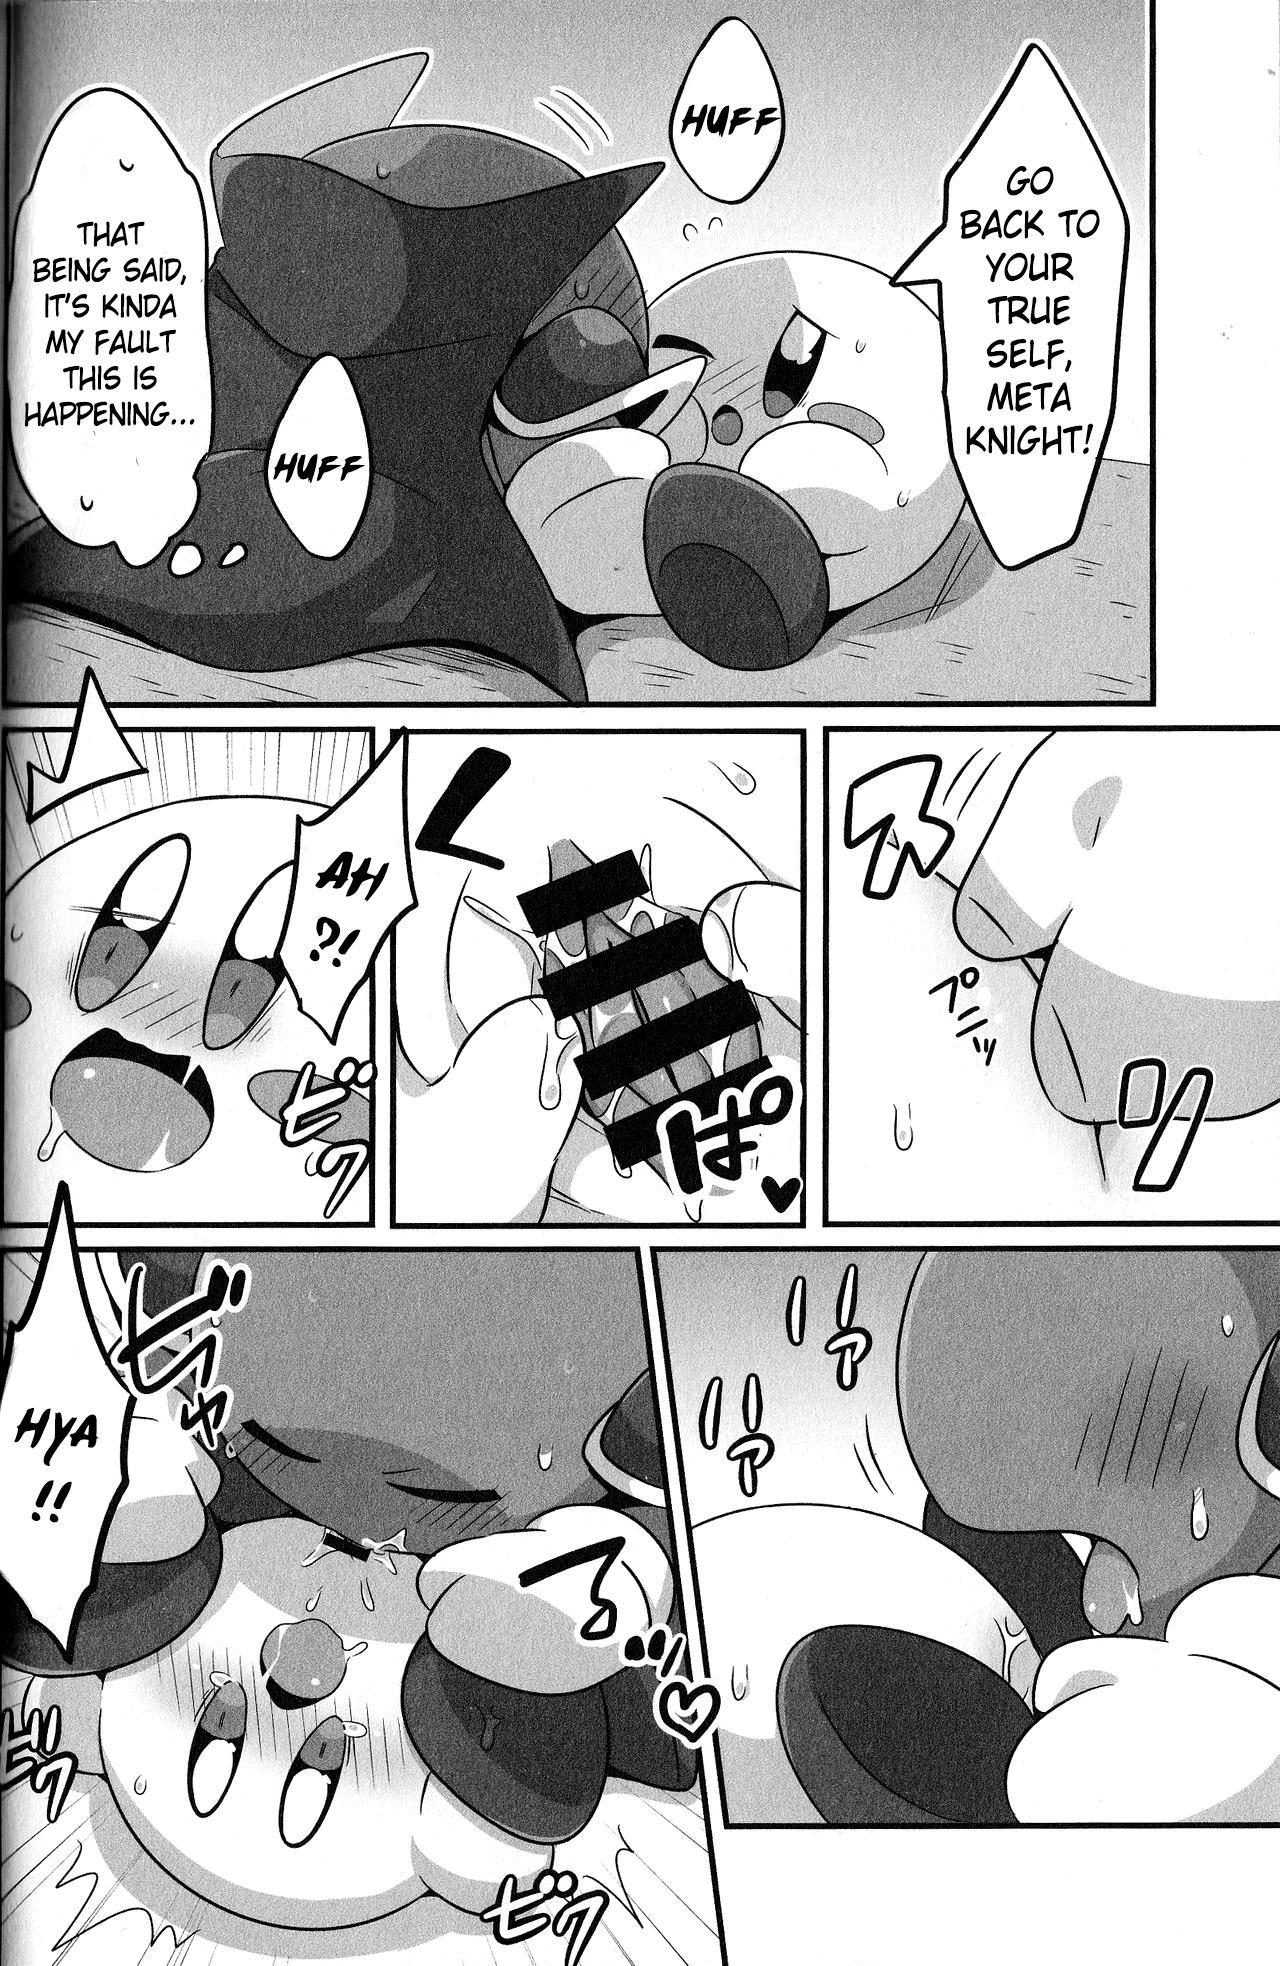 Real Couple I Want to Do XXX Even For Spheres! - Kirby Hot Chicks Fucking - Page 11